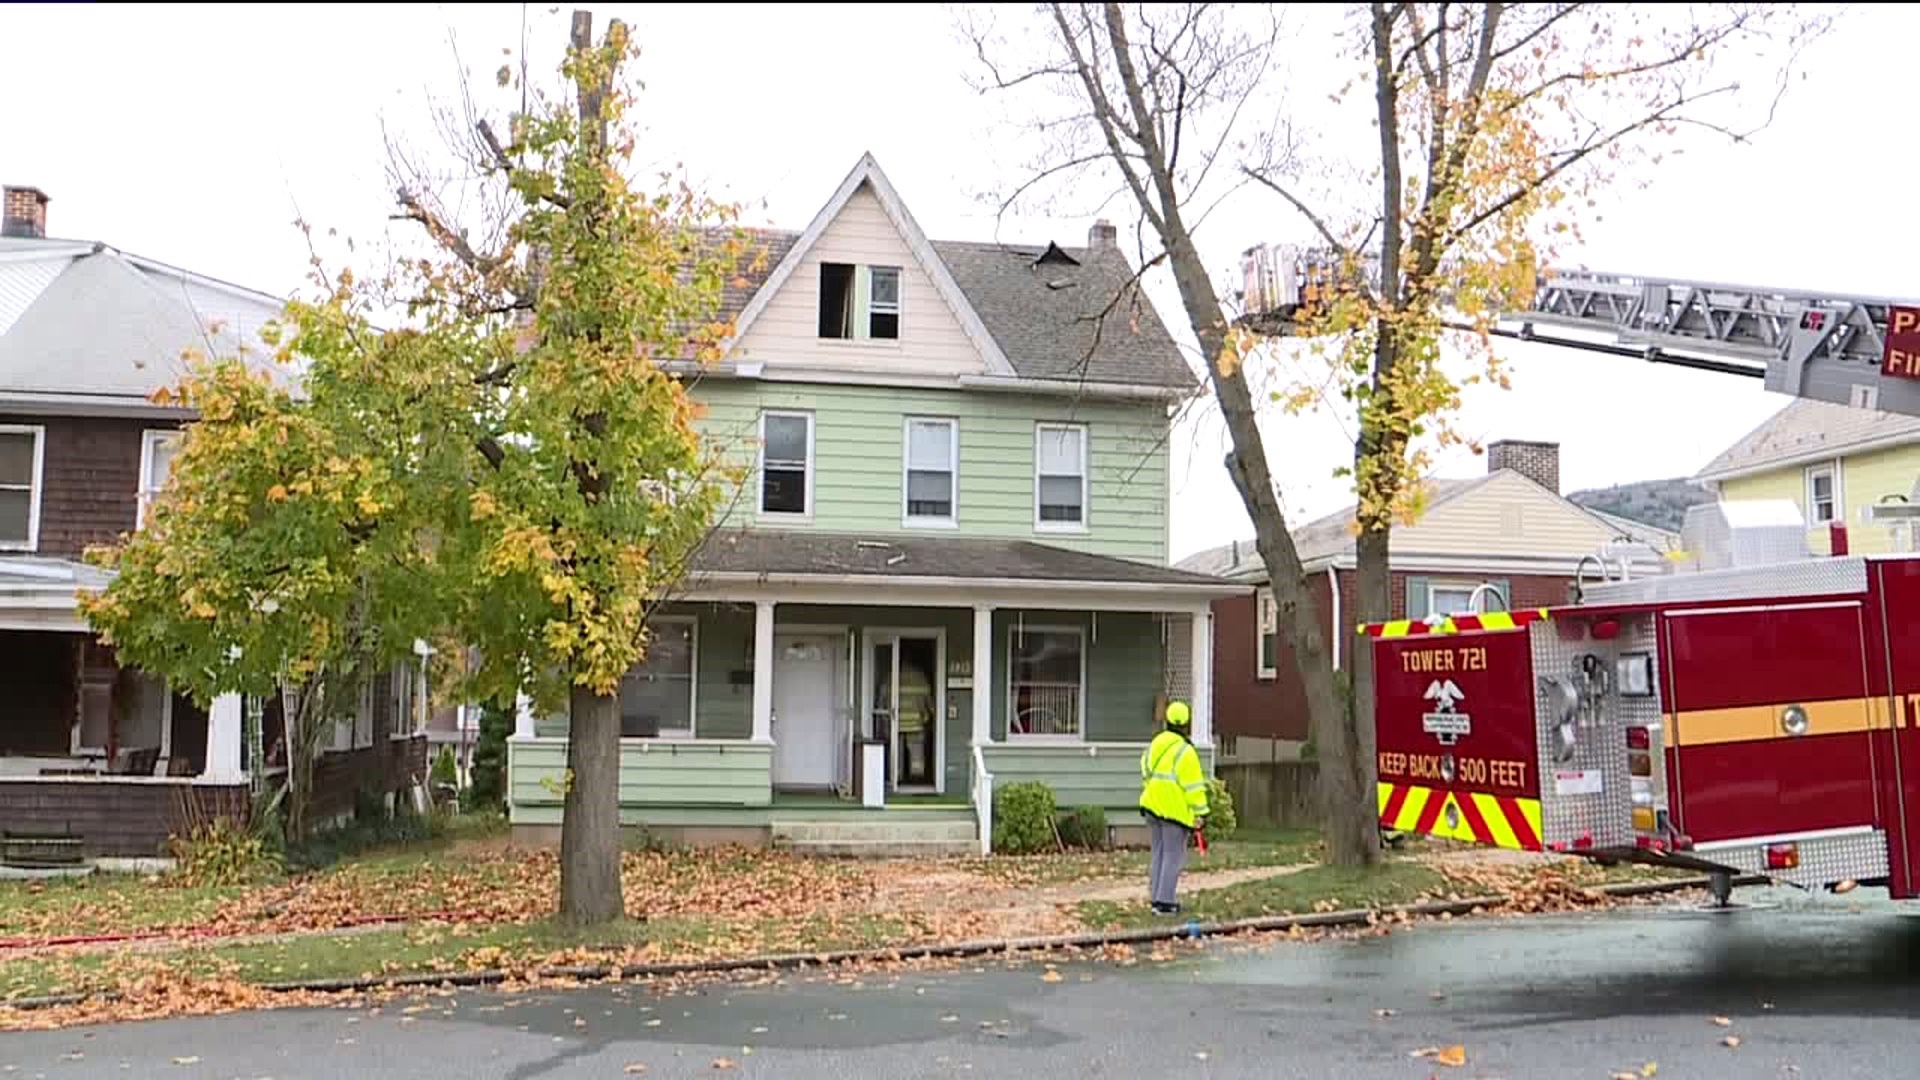 Family Escapes Unharmed After House Fire in Palmerton